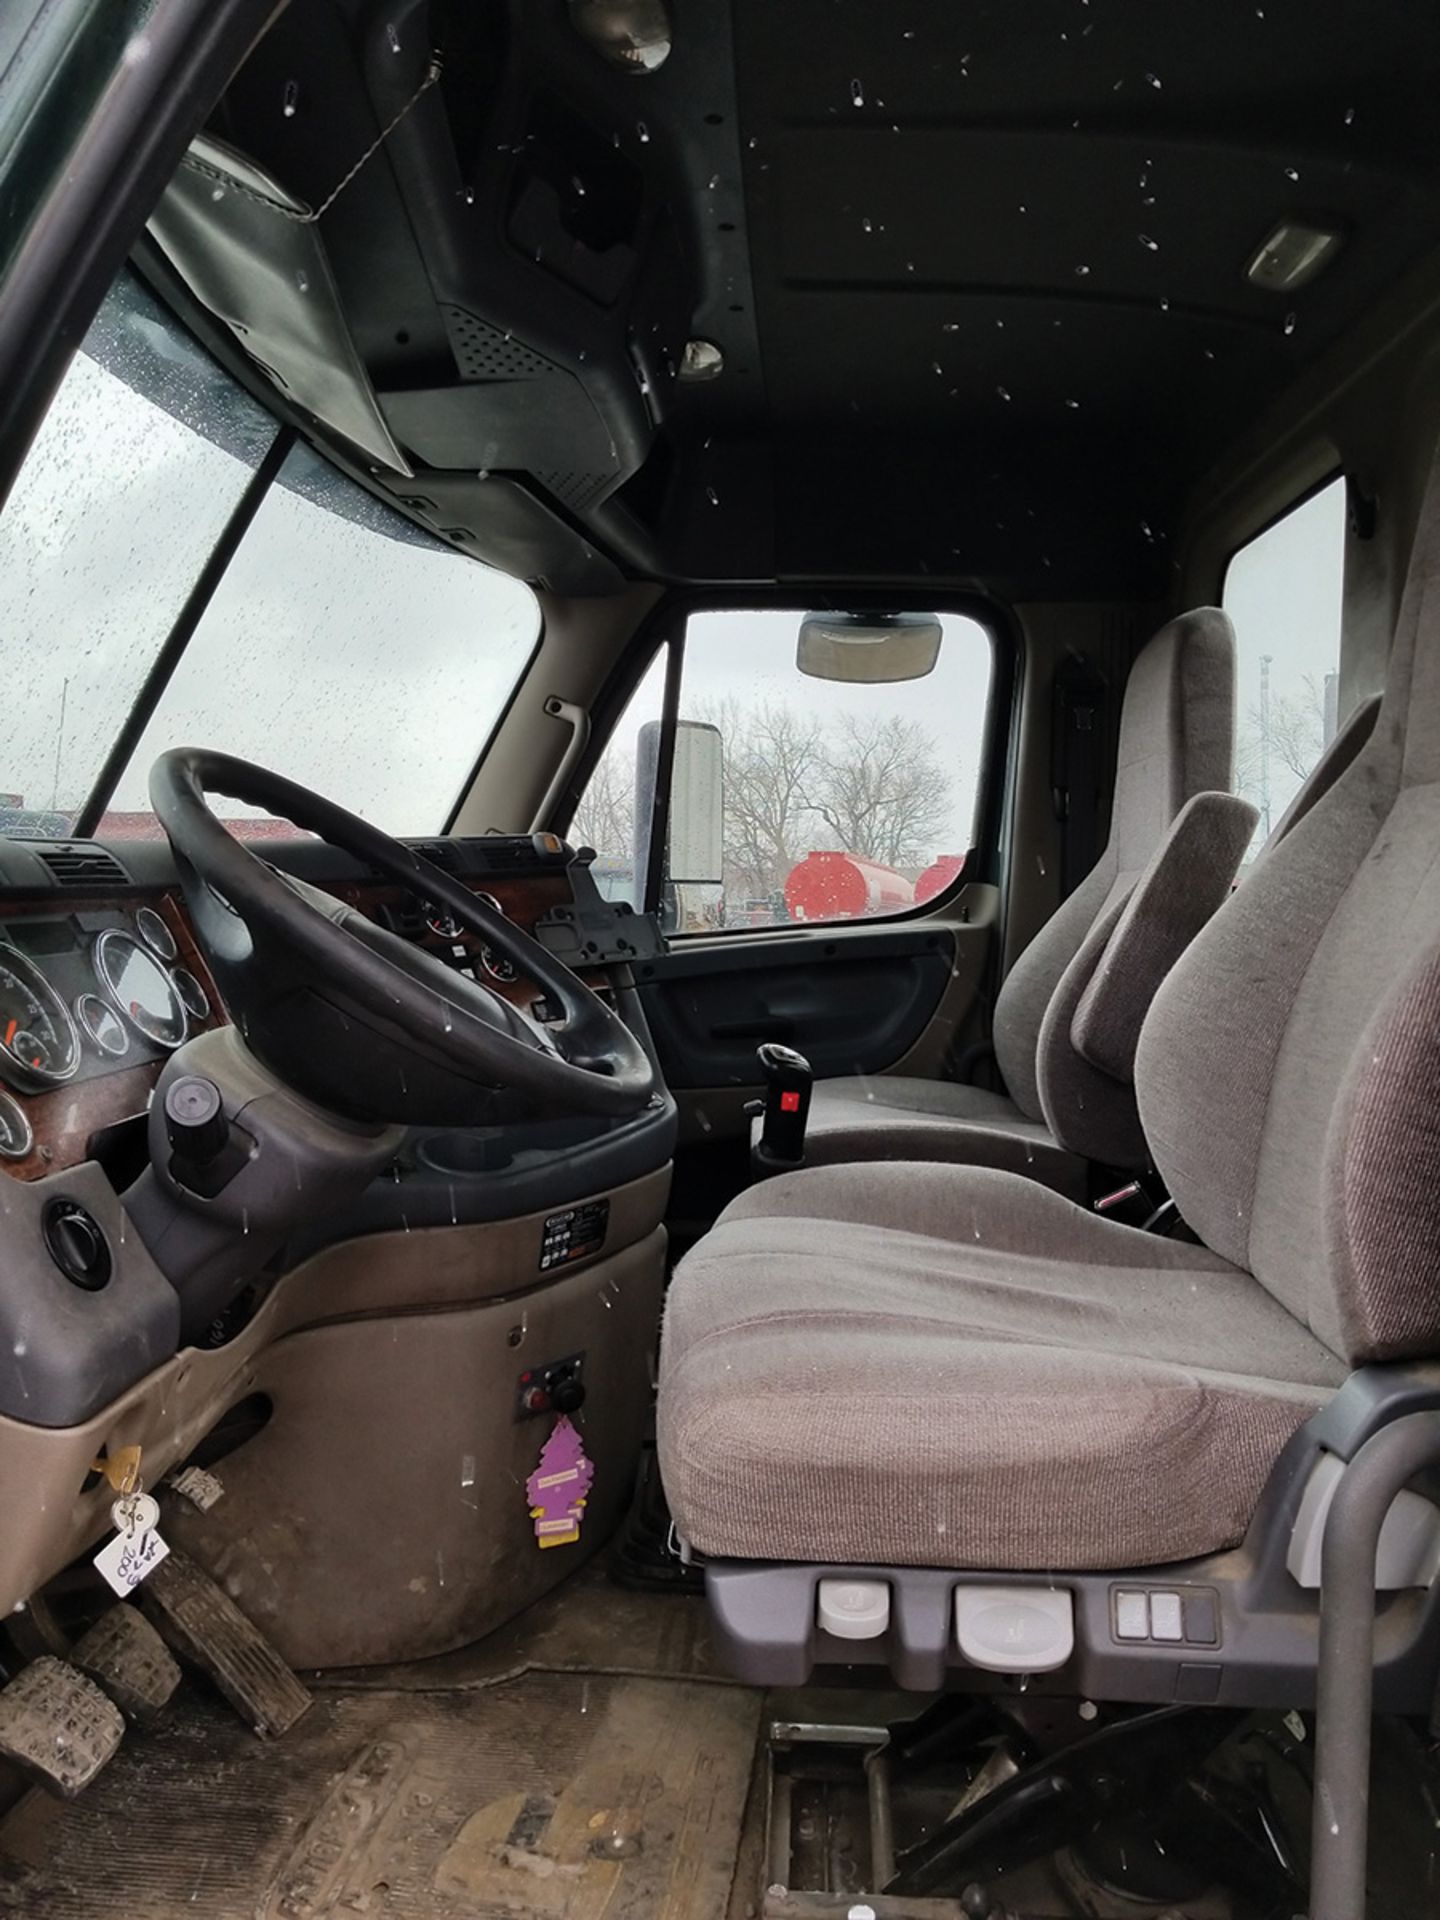 2015 FREIGHTLINER CASCADIA T/A TRUCK TRACTOR, DAY CAB, VIN 3AKJGED5XFSGM1604, 226,053 MILES, EATON - Image 5 of 6